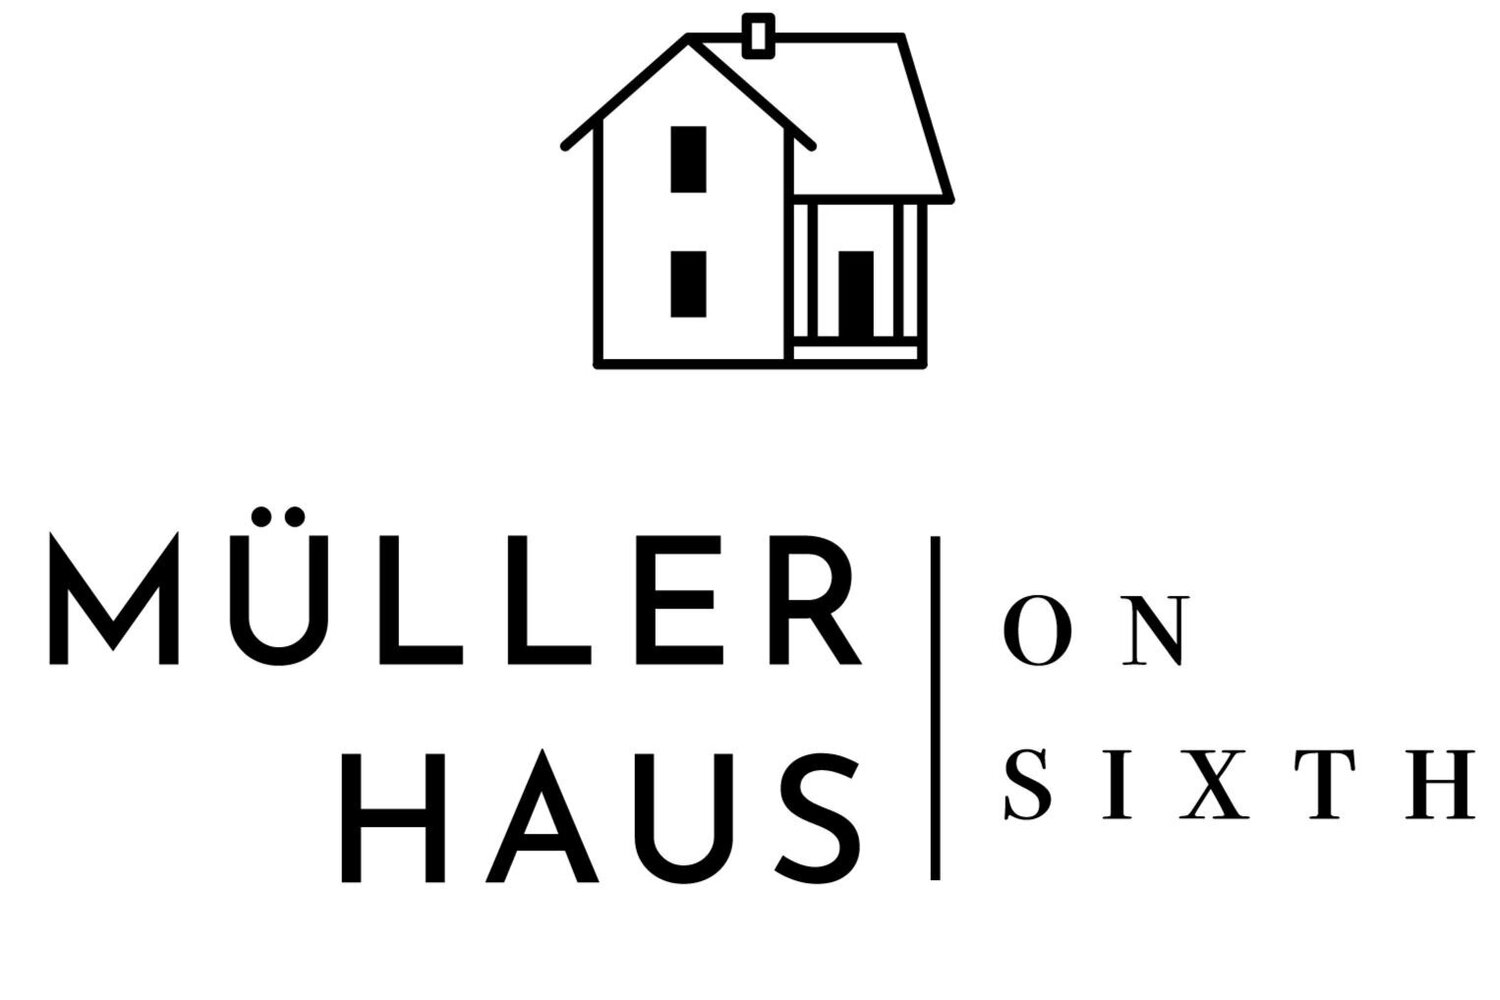 Müller Haus on Sixth